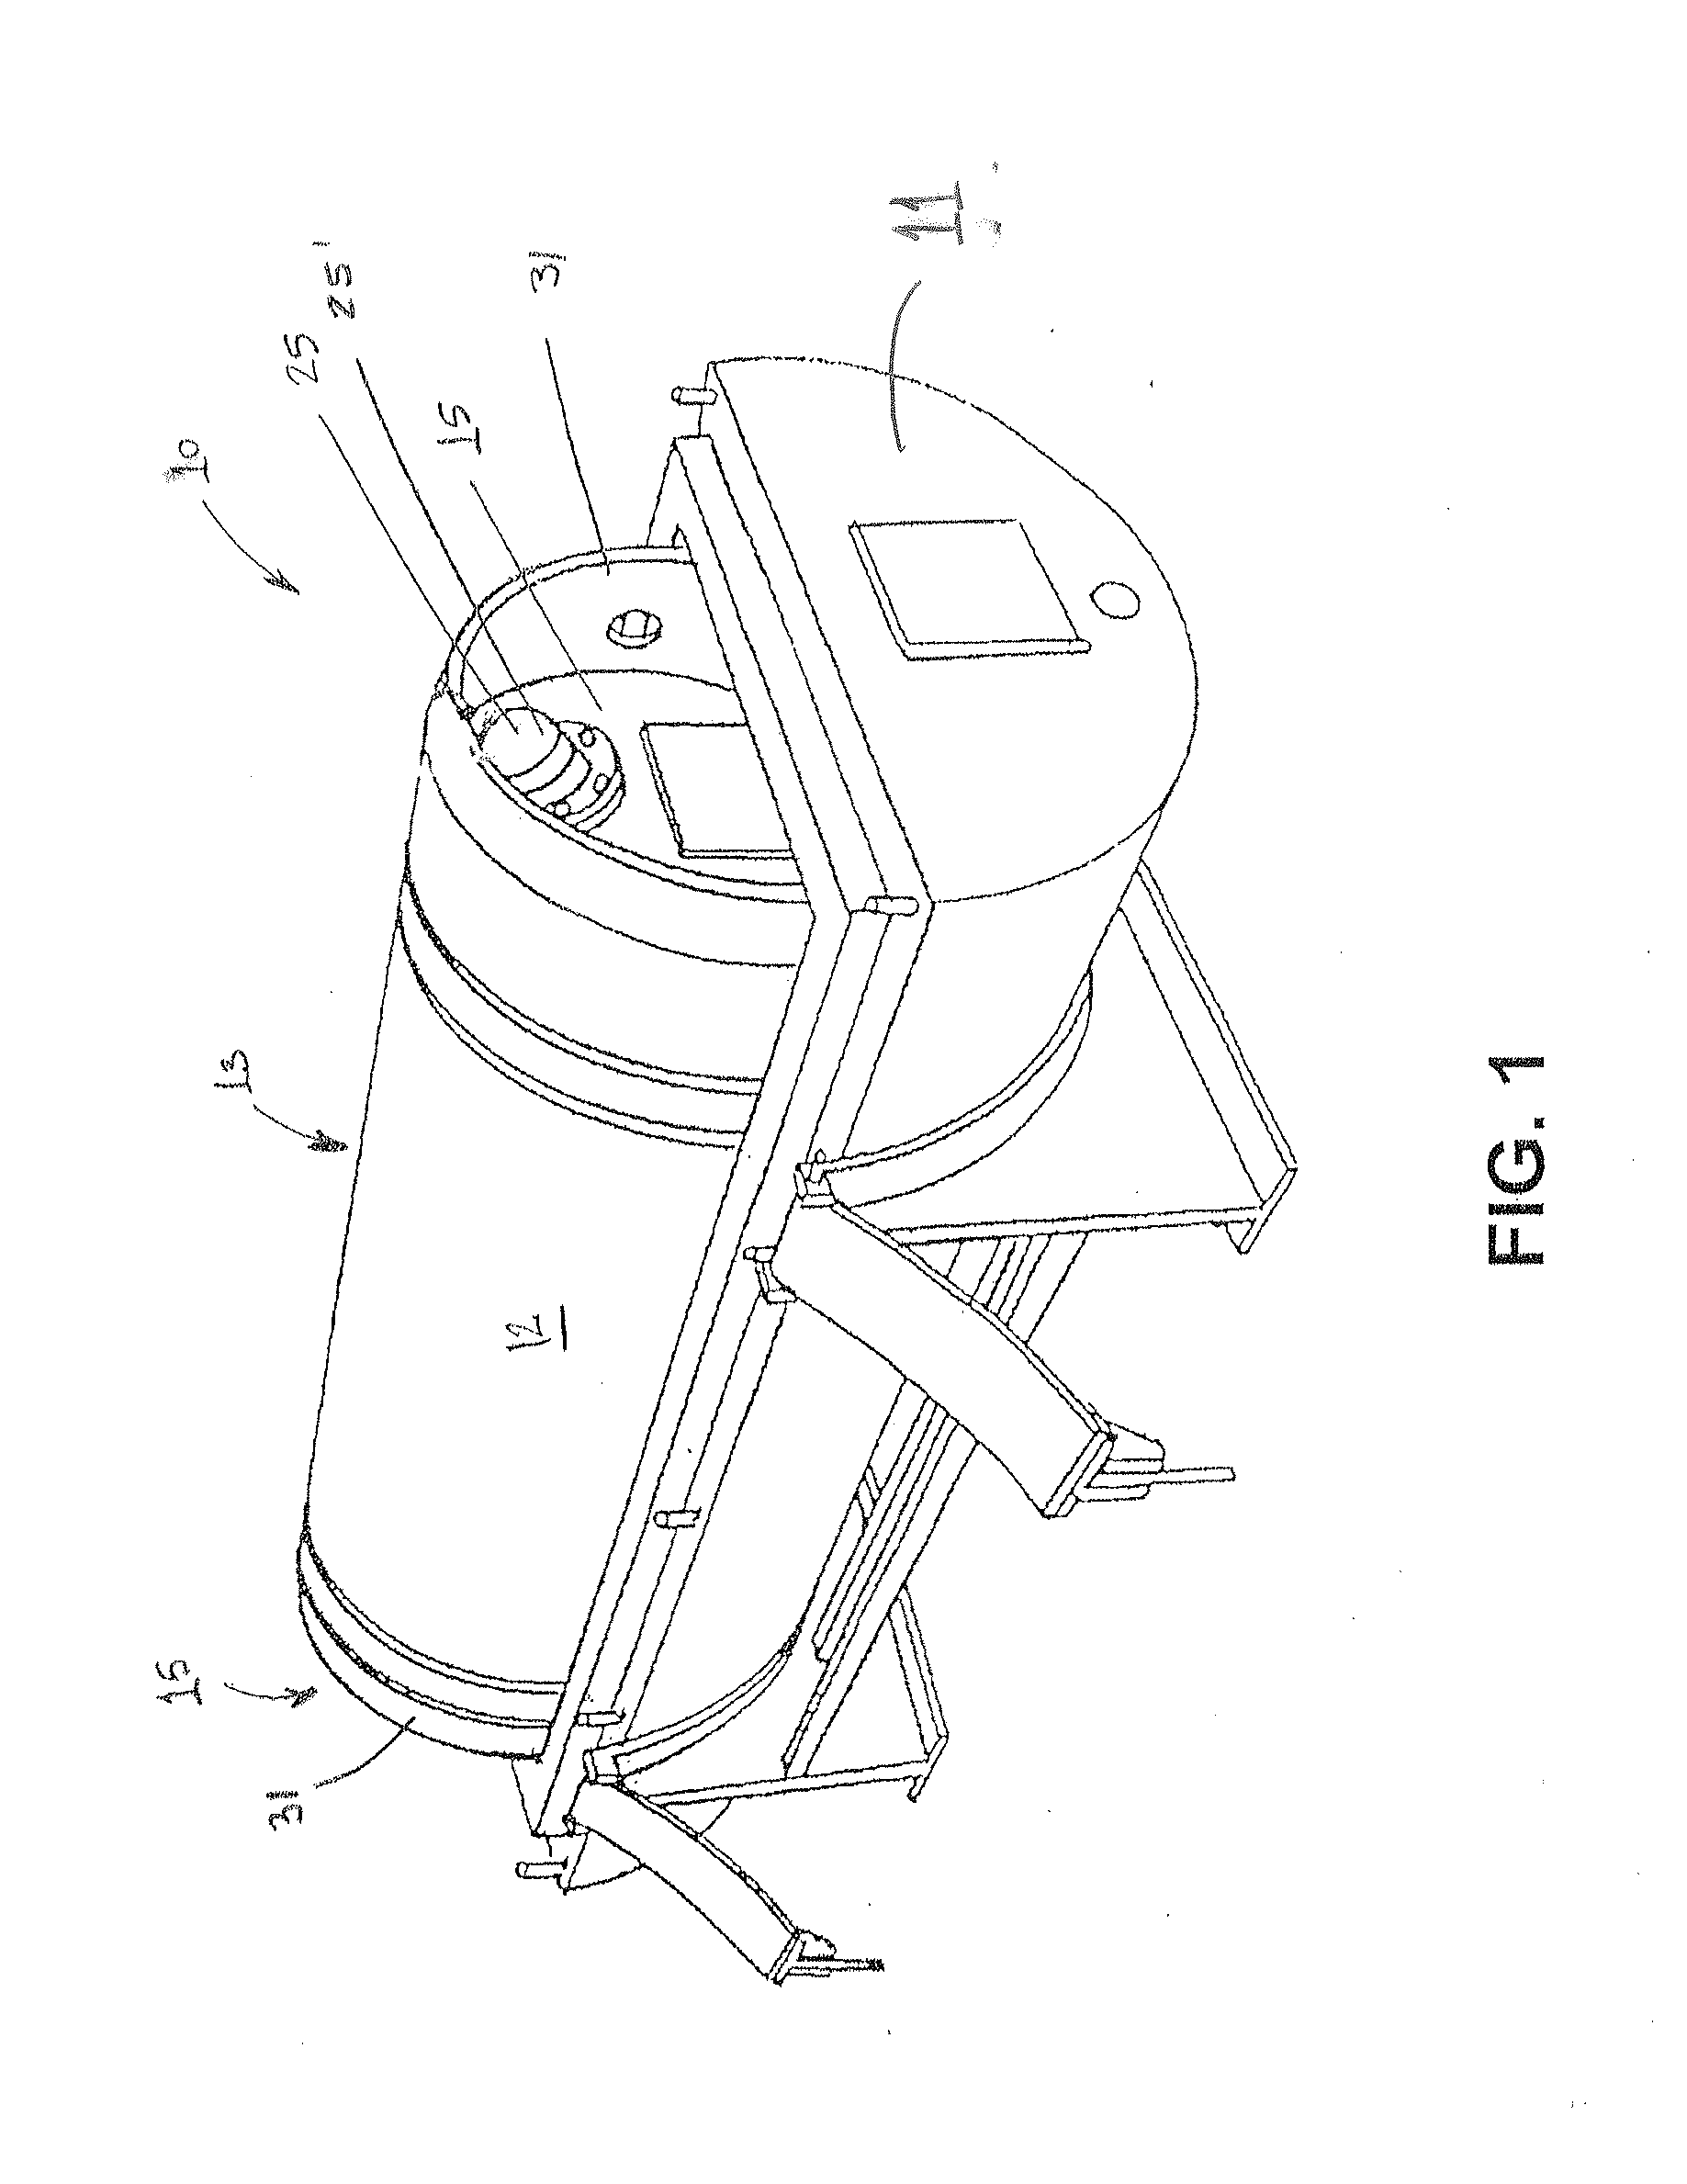 Container for transporting and storing uranium hexaflouride